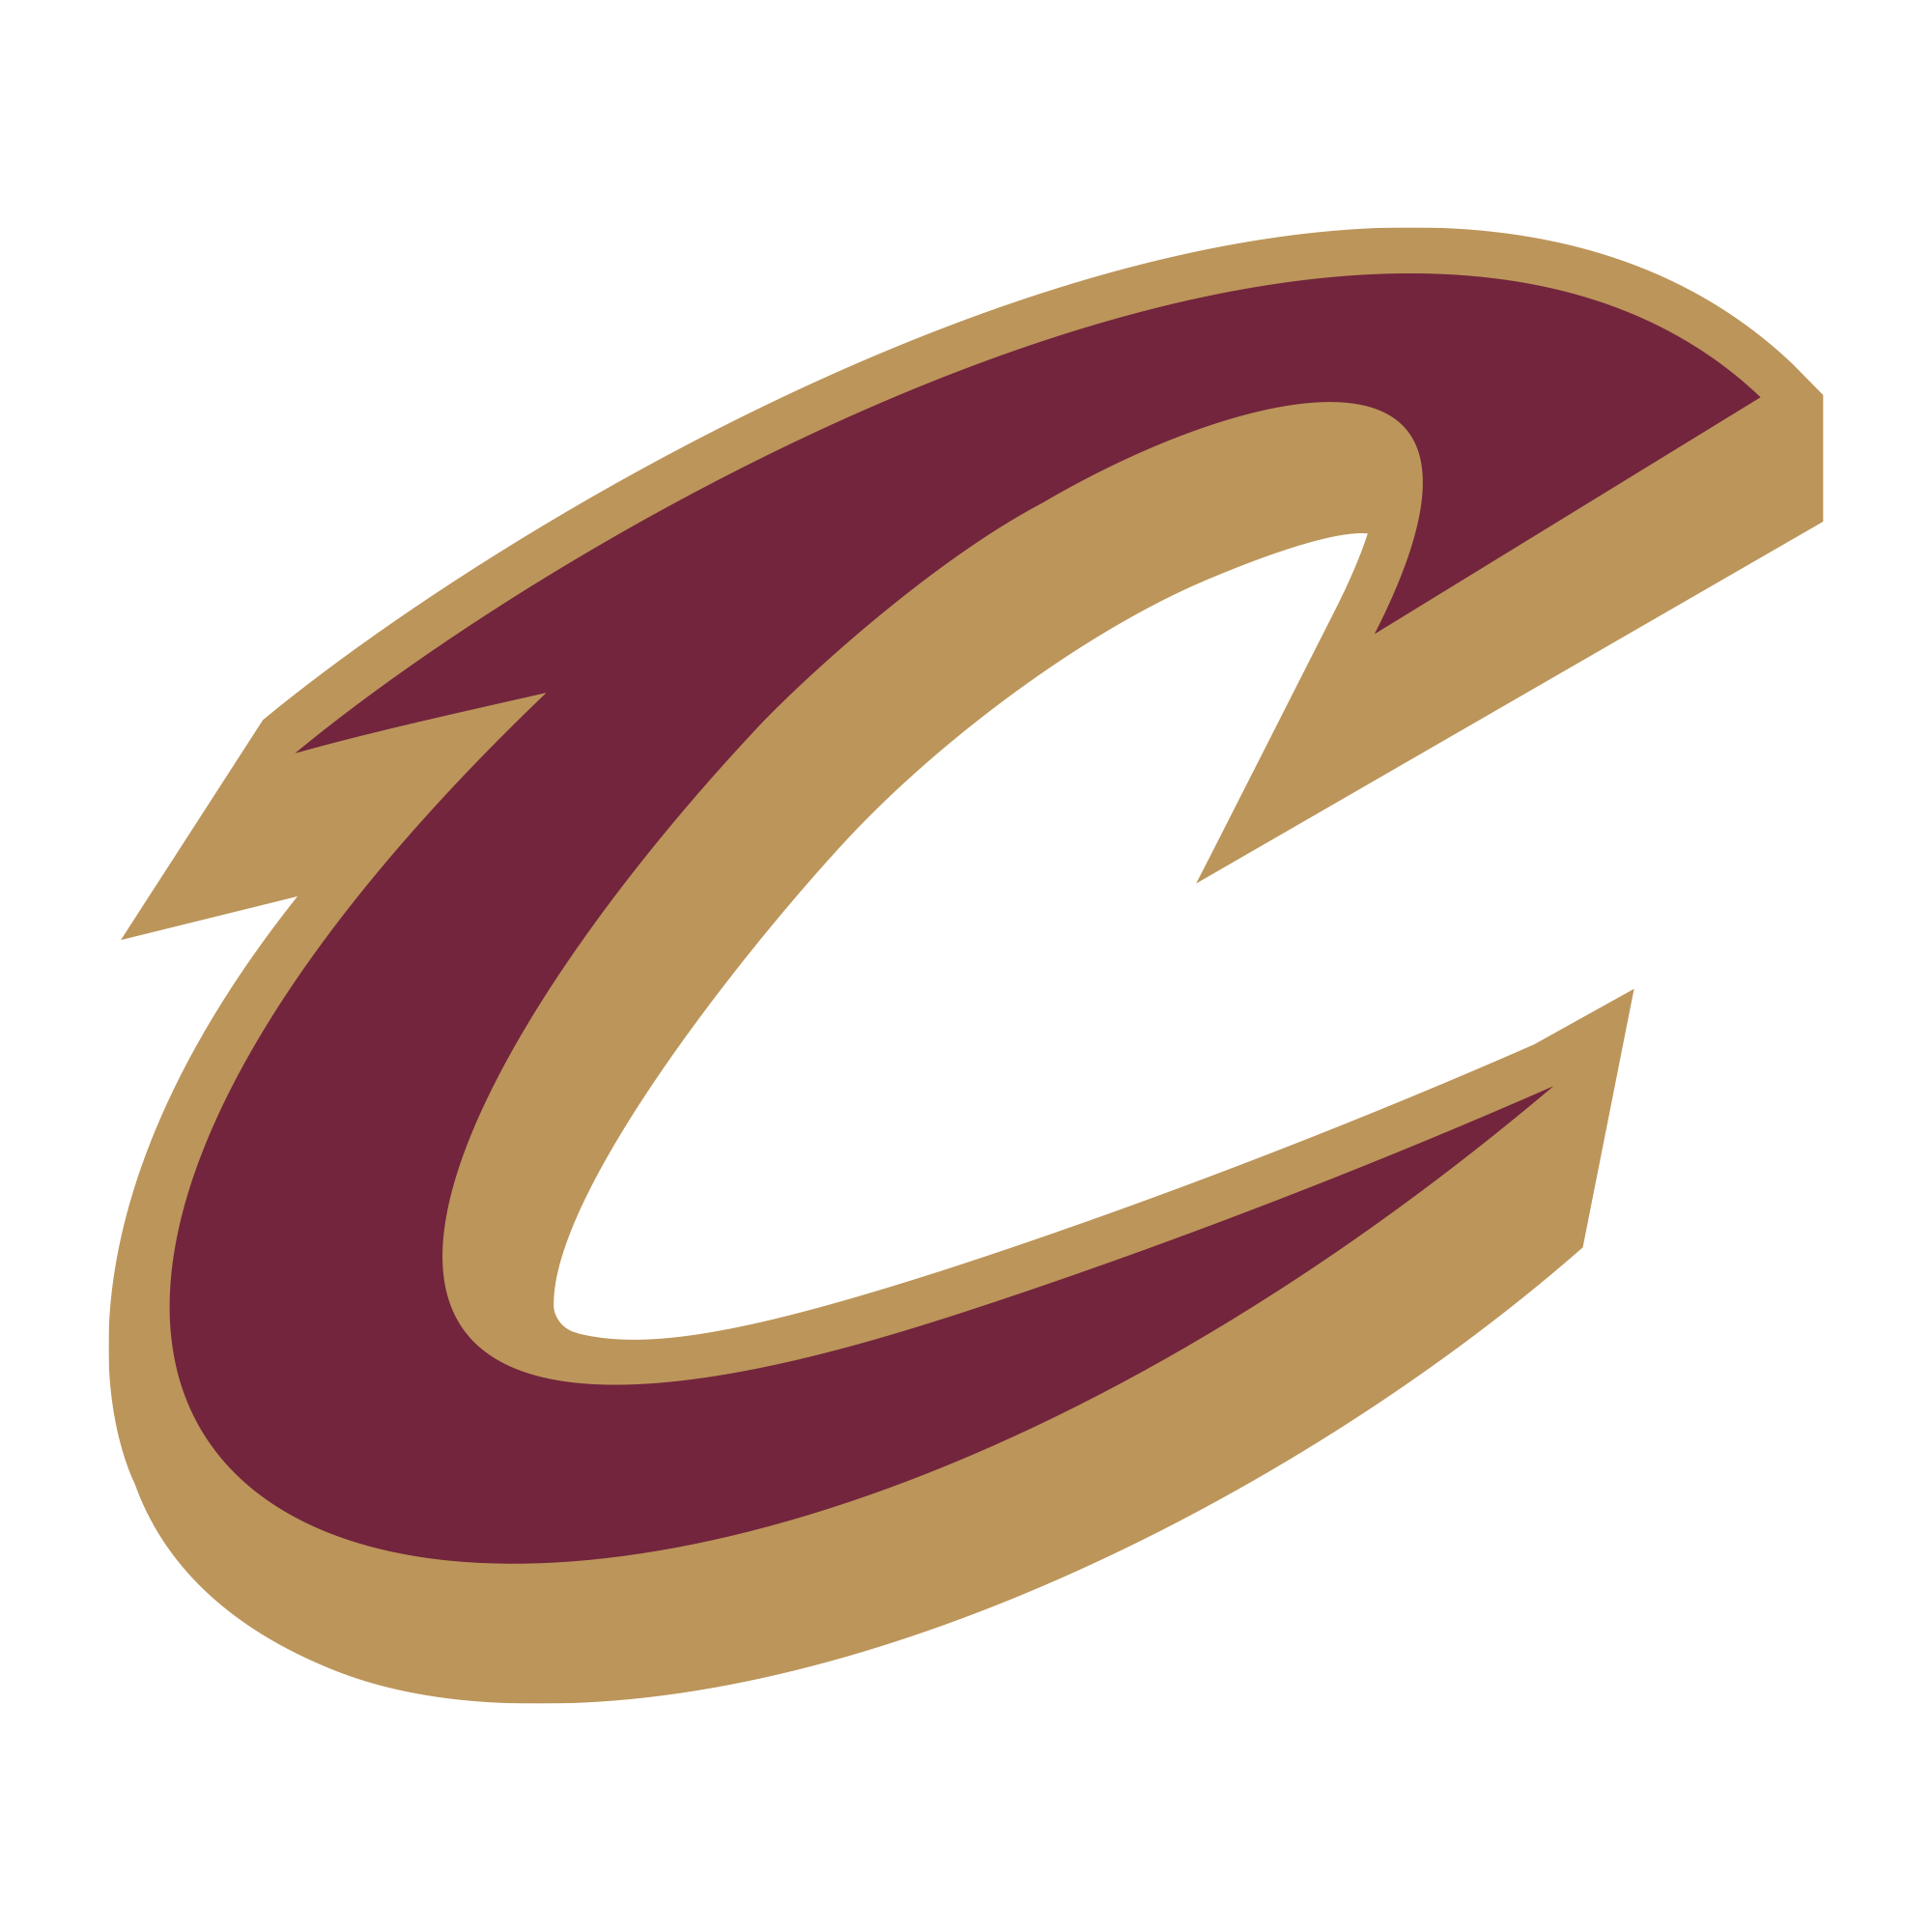 Team Selection: Cleveland Cavaliers